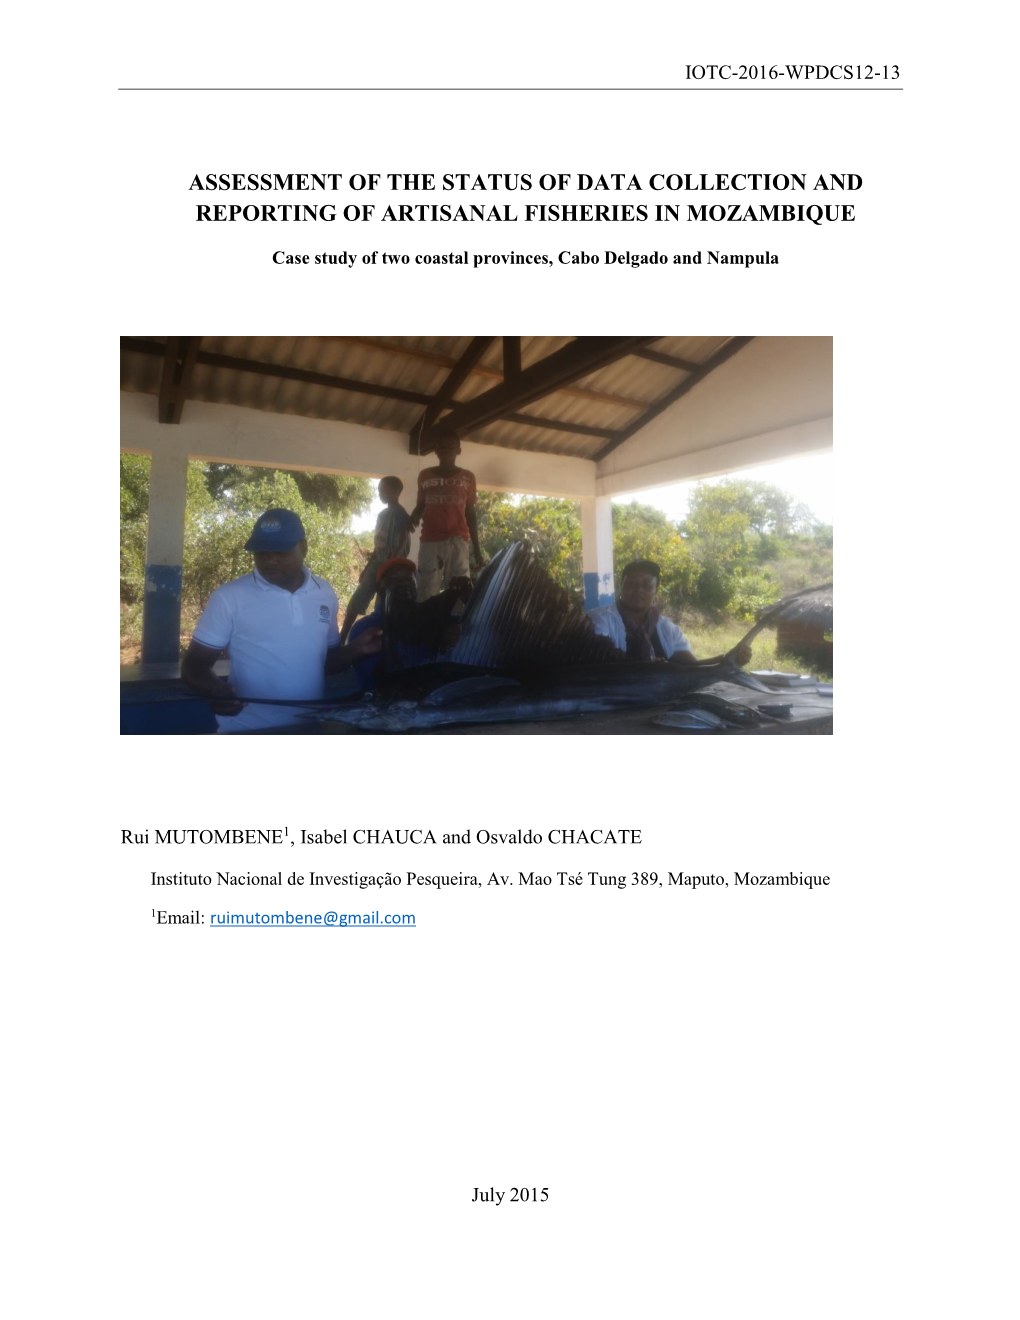 Assessment of the Status of Data Collection and Reporting of Artisanal Fisheries in Mozambique